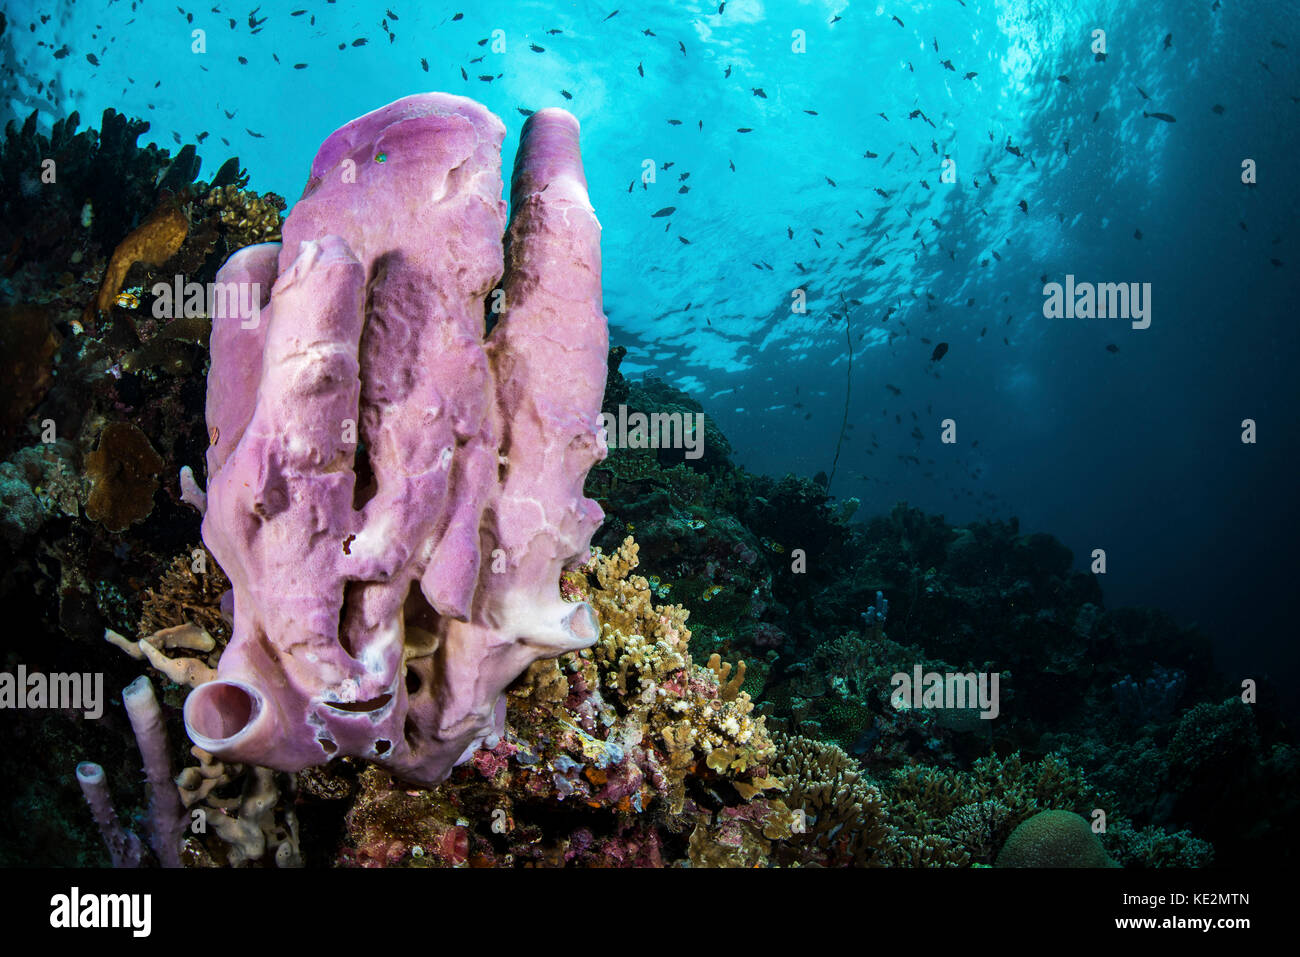 A coral reef in Indonesia hosts fish and sponges. Stock Photo